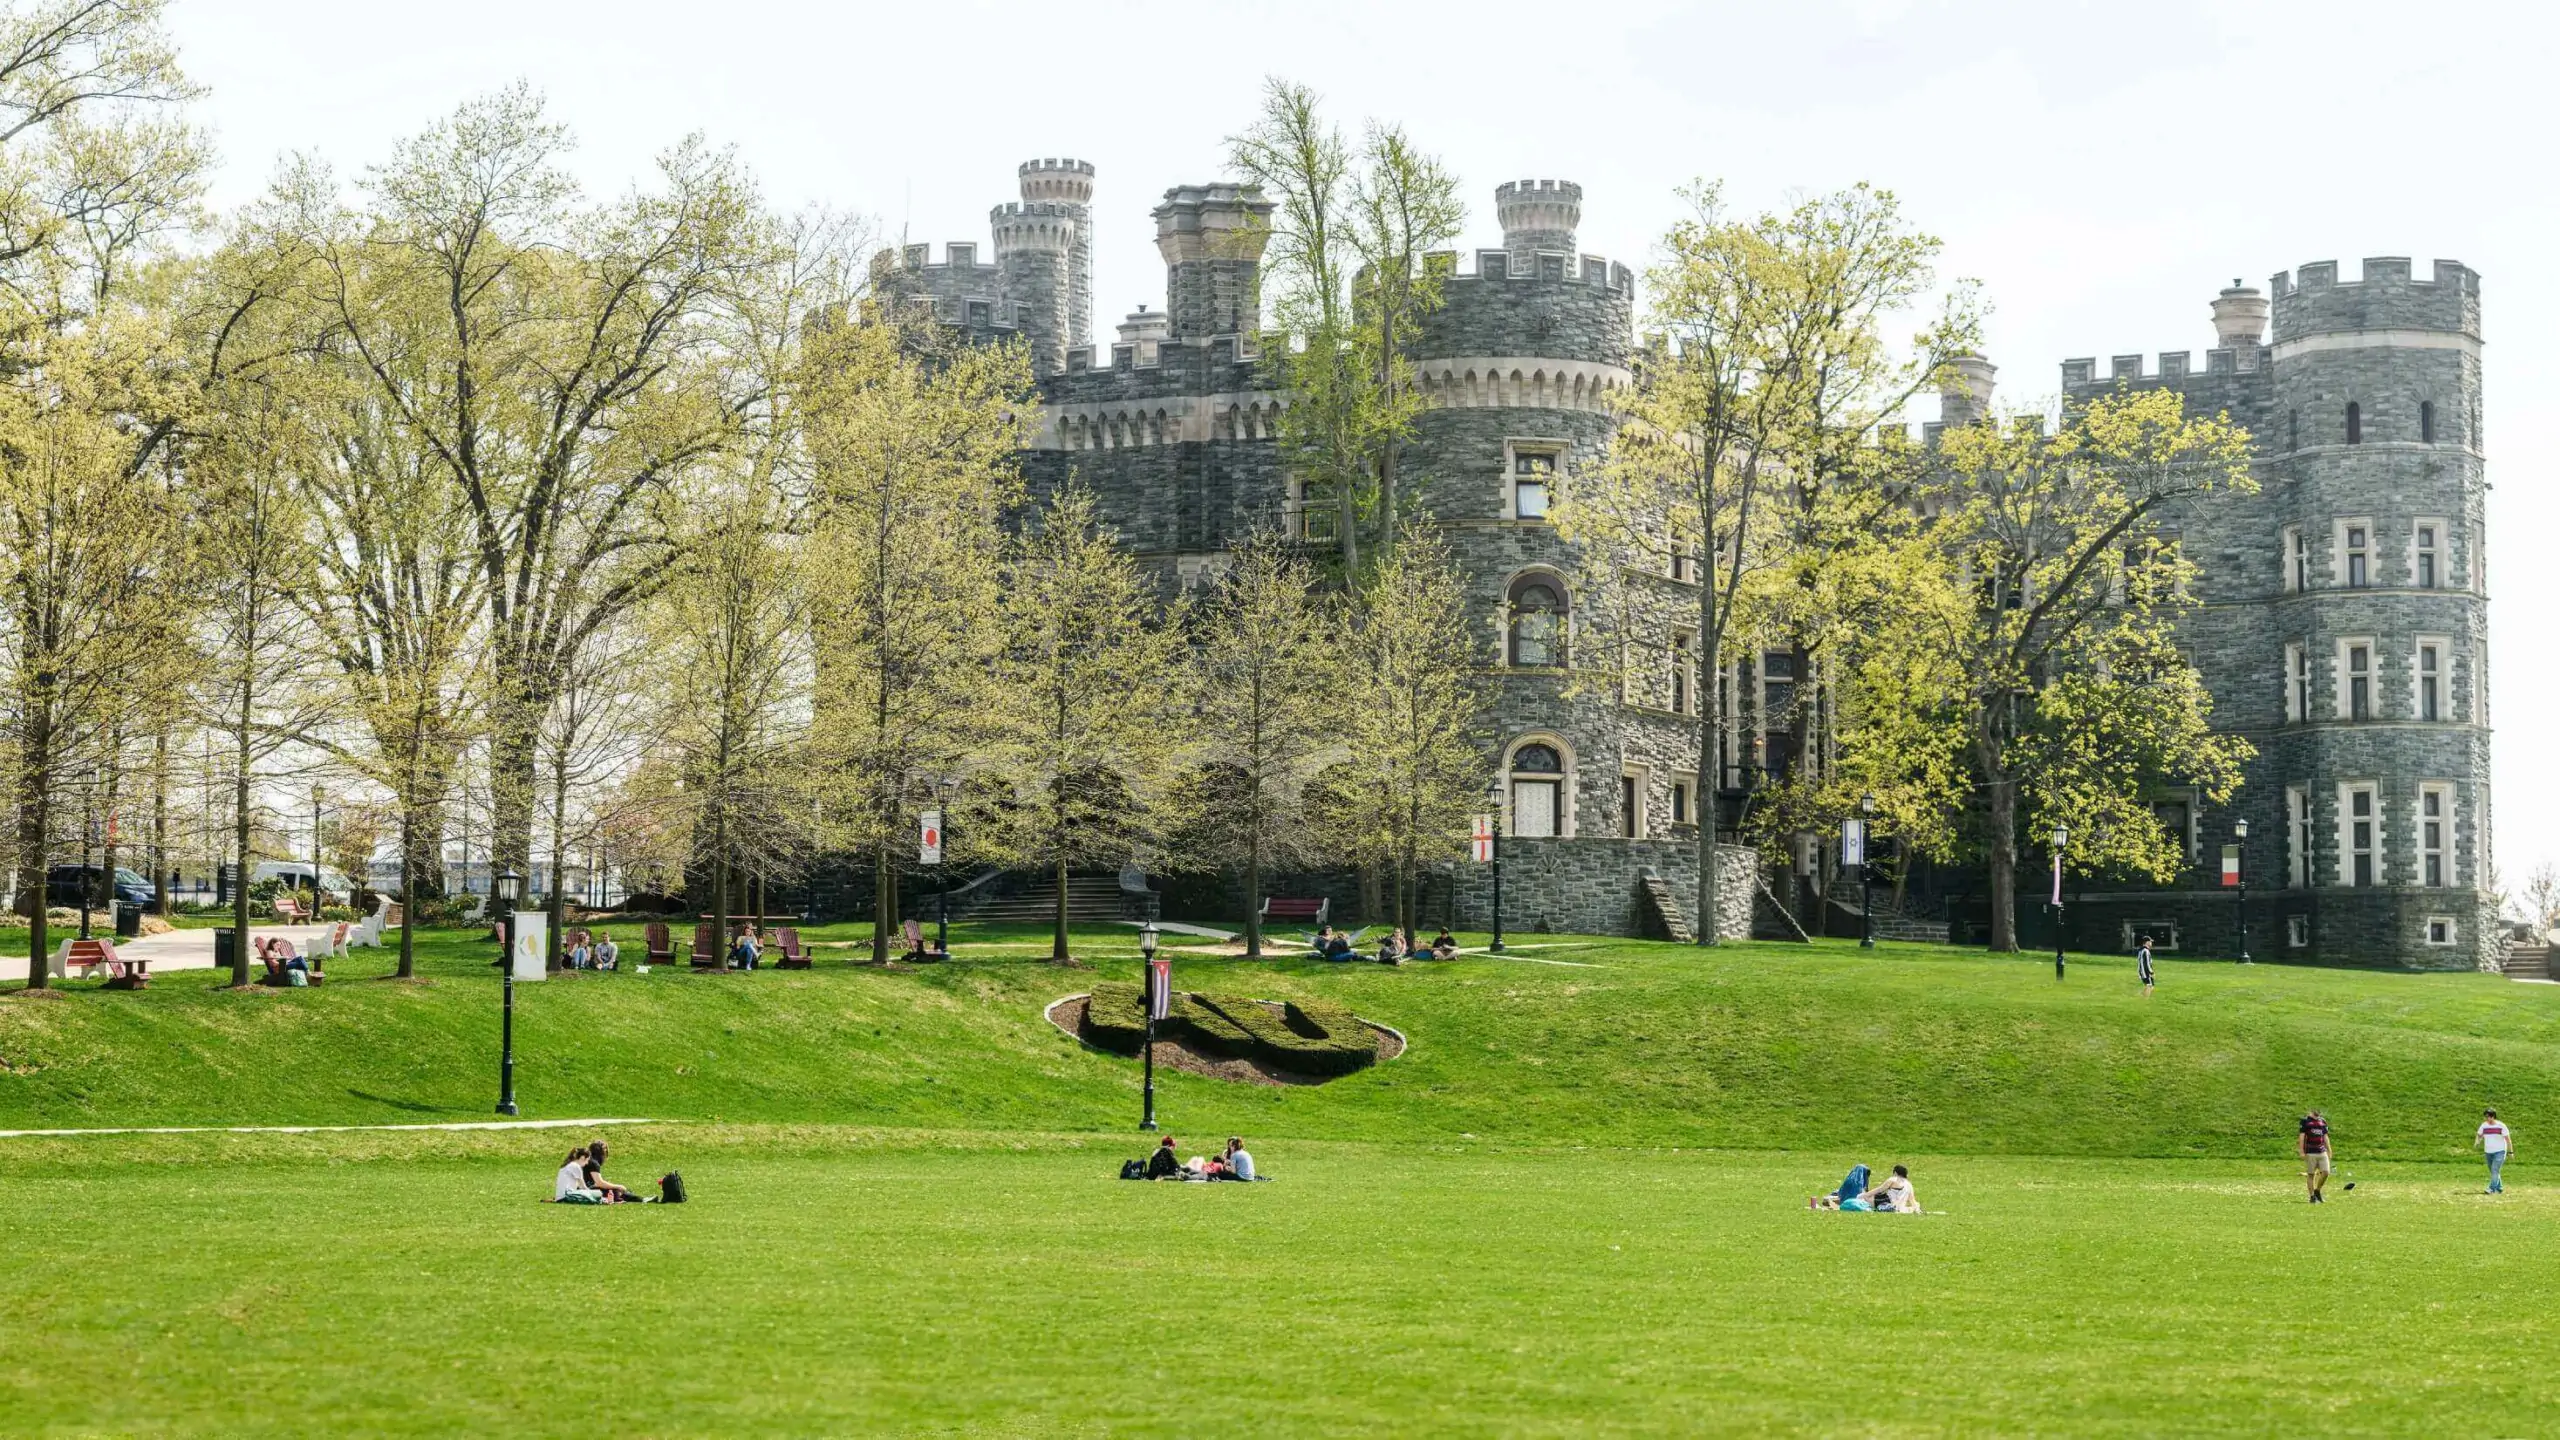 Students socialize across Haber Green in front of Grey Castle